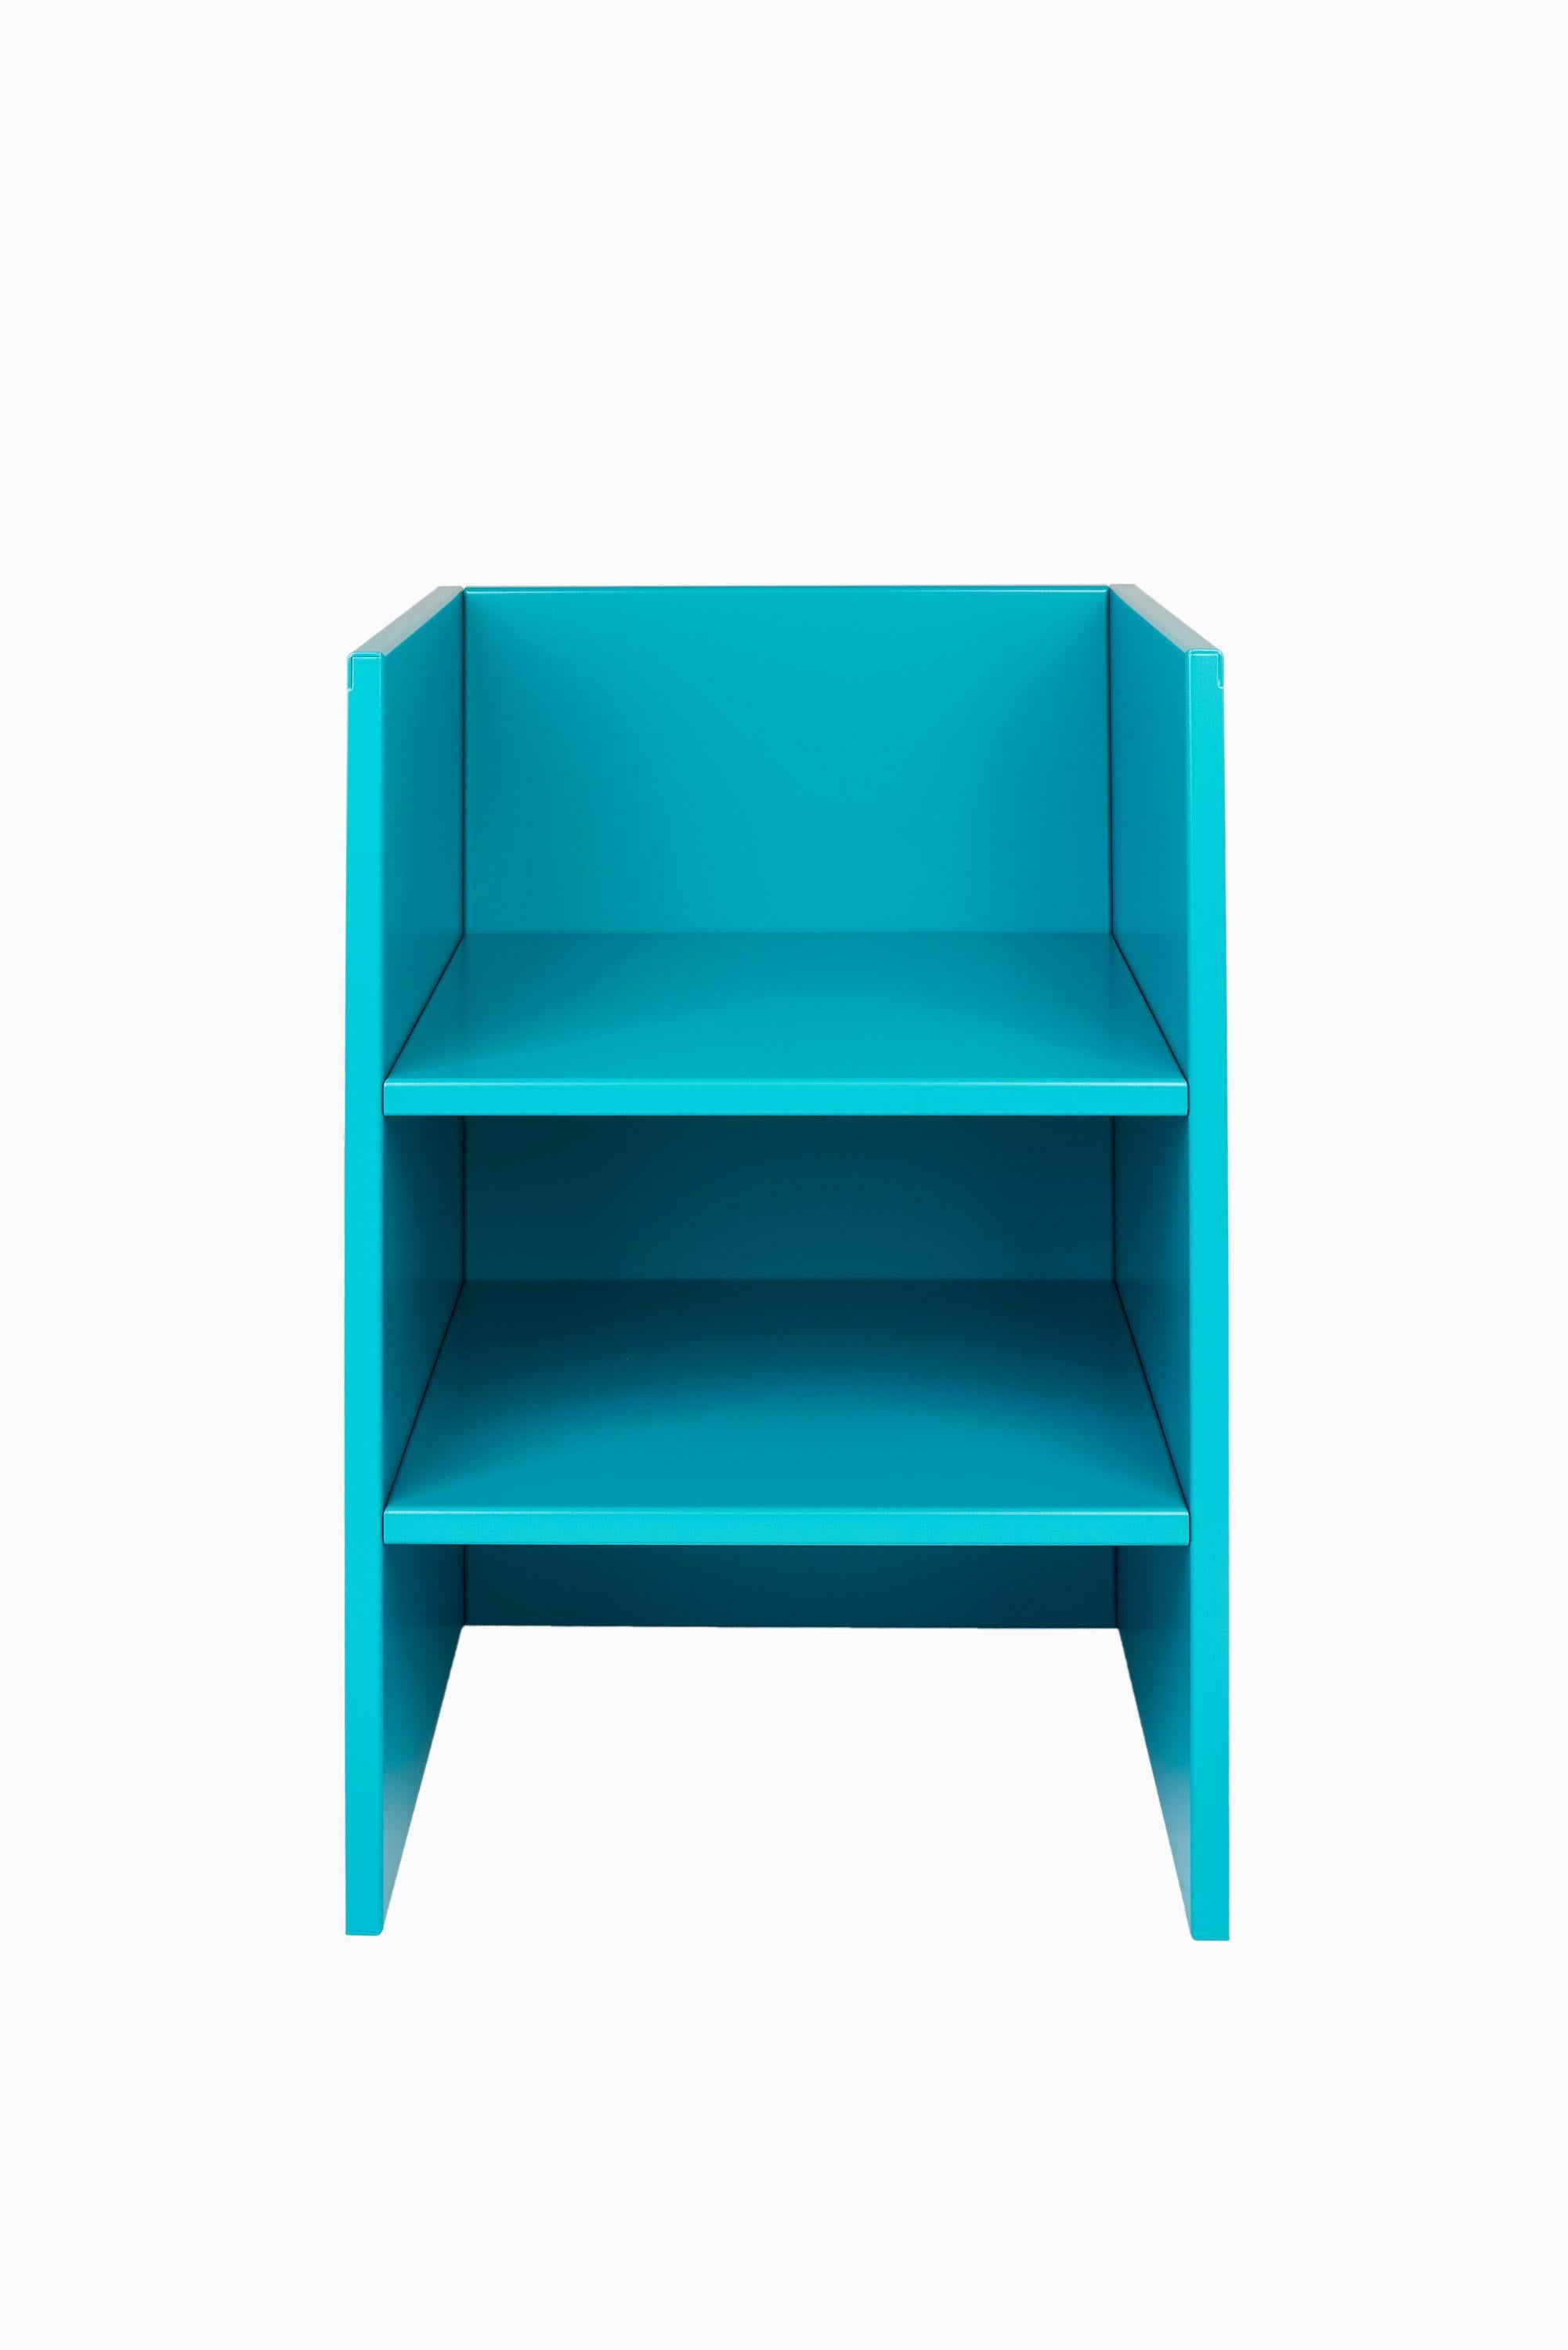 DONALD JUDD (1928-1994)
Armchair 47/48
2017
Painted aluminium, Turquoise blue, RAL 5018
75 x 50 x 50 cm
29.53 x 19.69 x 19.69 inches
Signed, inscribed, dated and numbered 